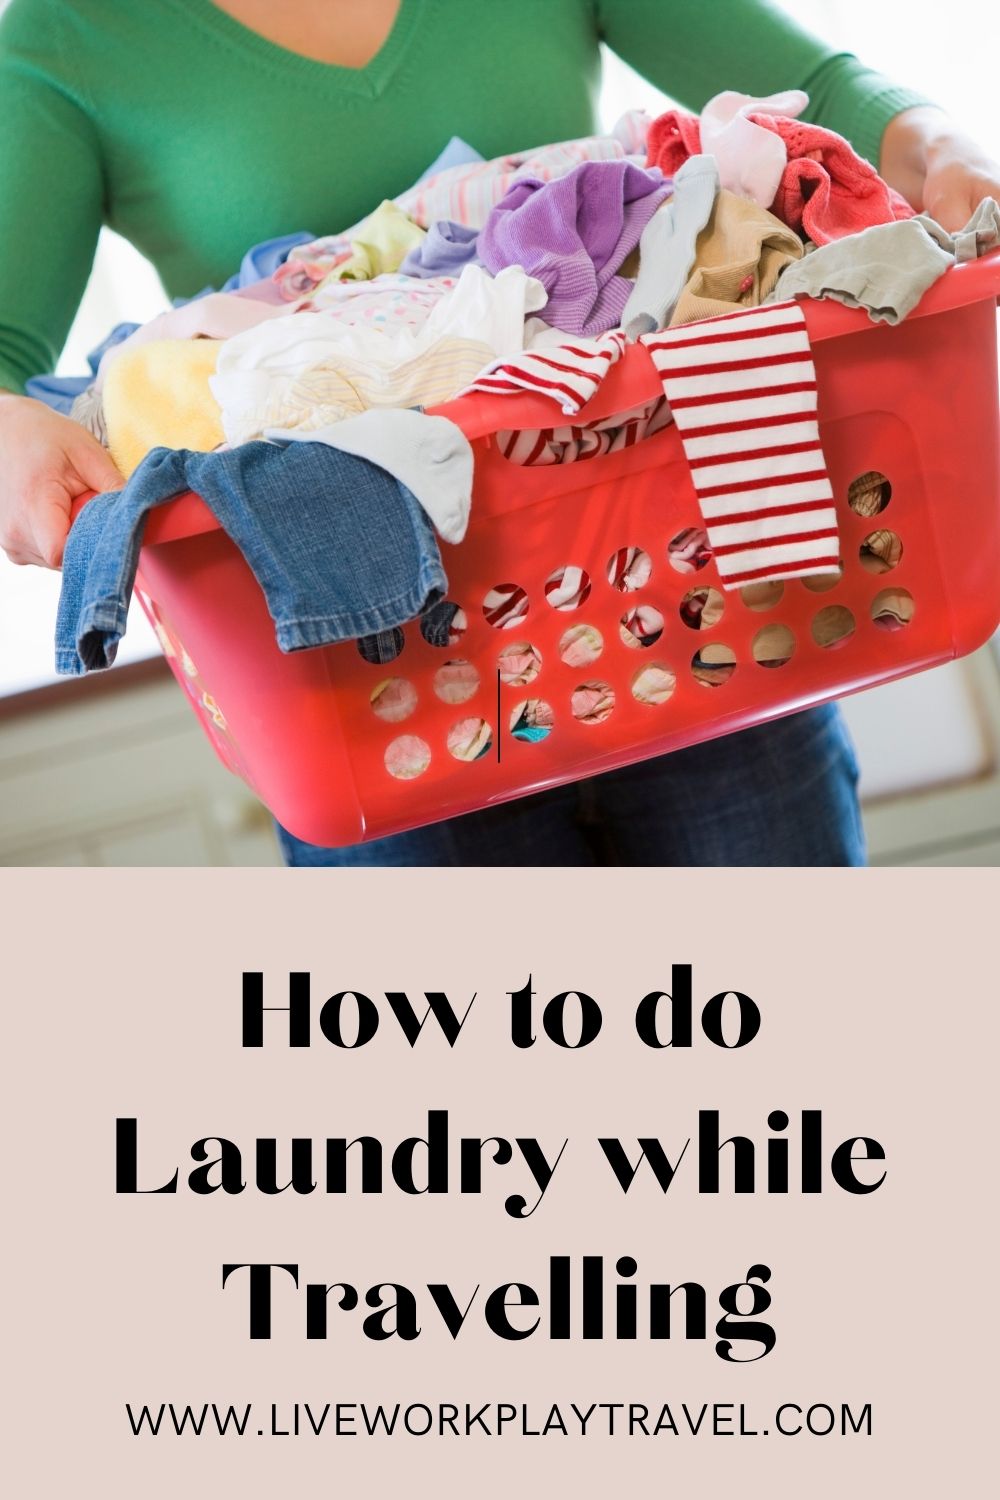 Doing Laundry While Travelling Shouldn't Be a Chore. Here's My Tips  How You Can Do Laundry while Travelling Just Like This Lady Carrying Her laundry In A Laundry Basket.